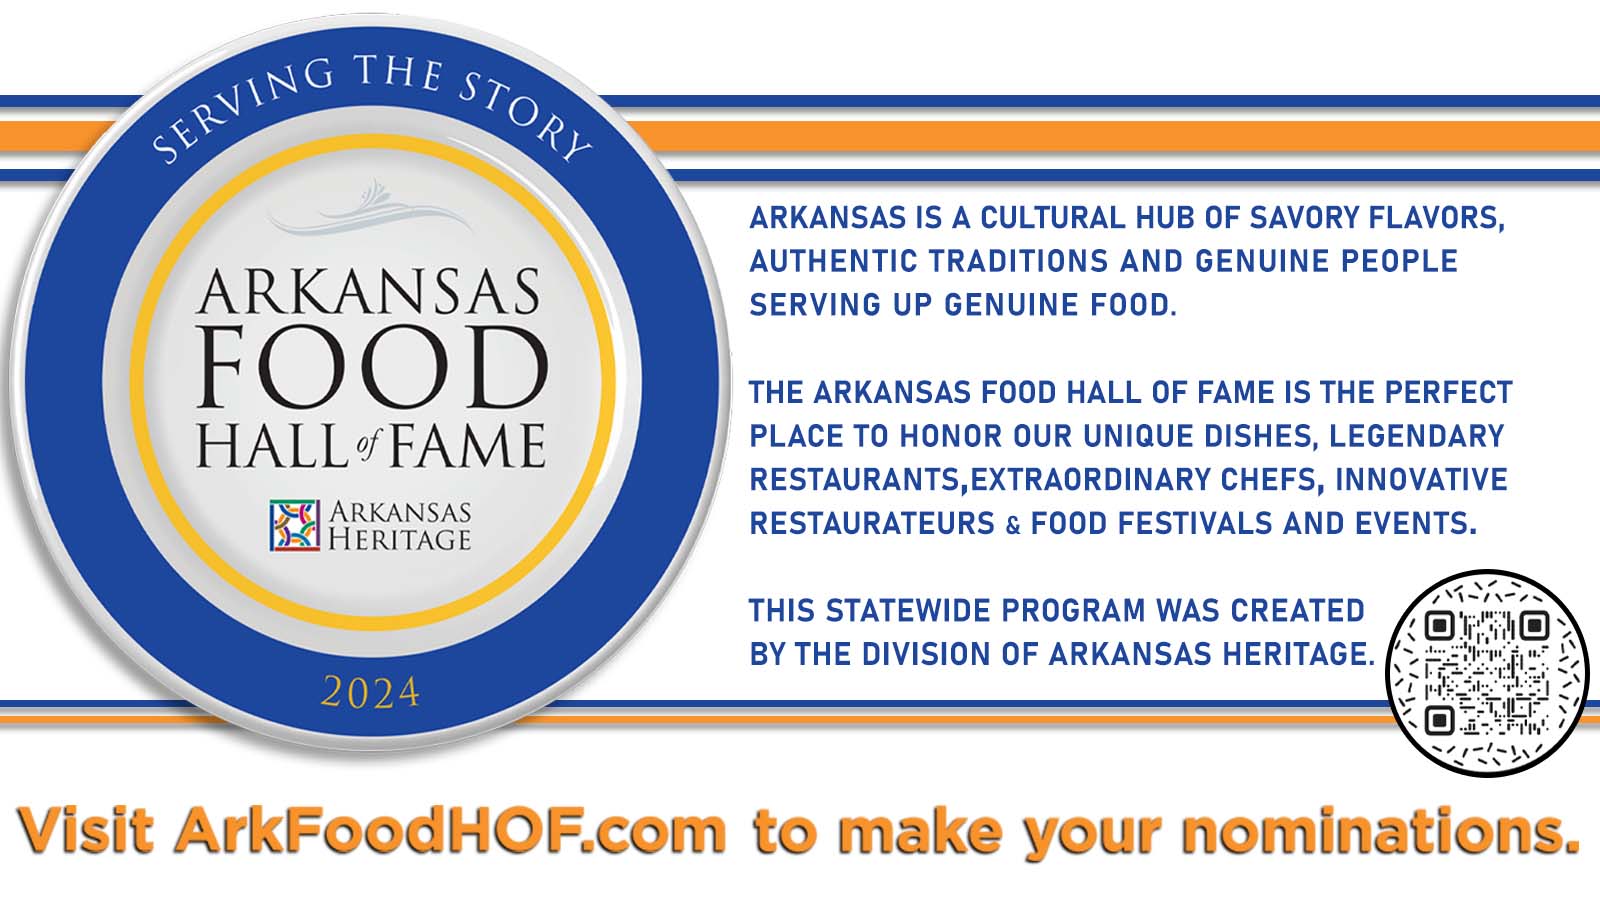 Arkansas Food Hall of Fame Now Accepting Nominations